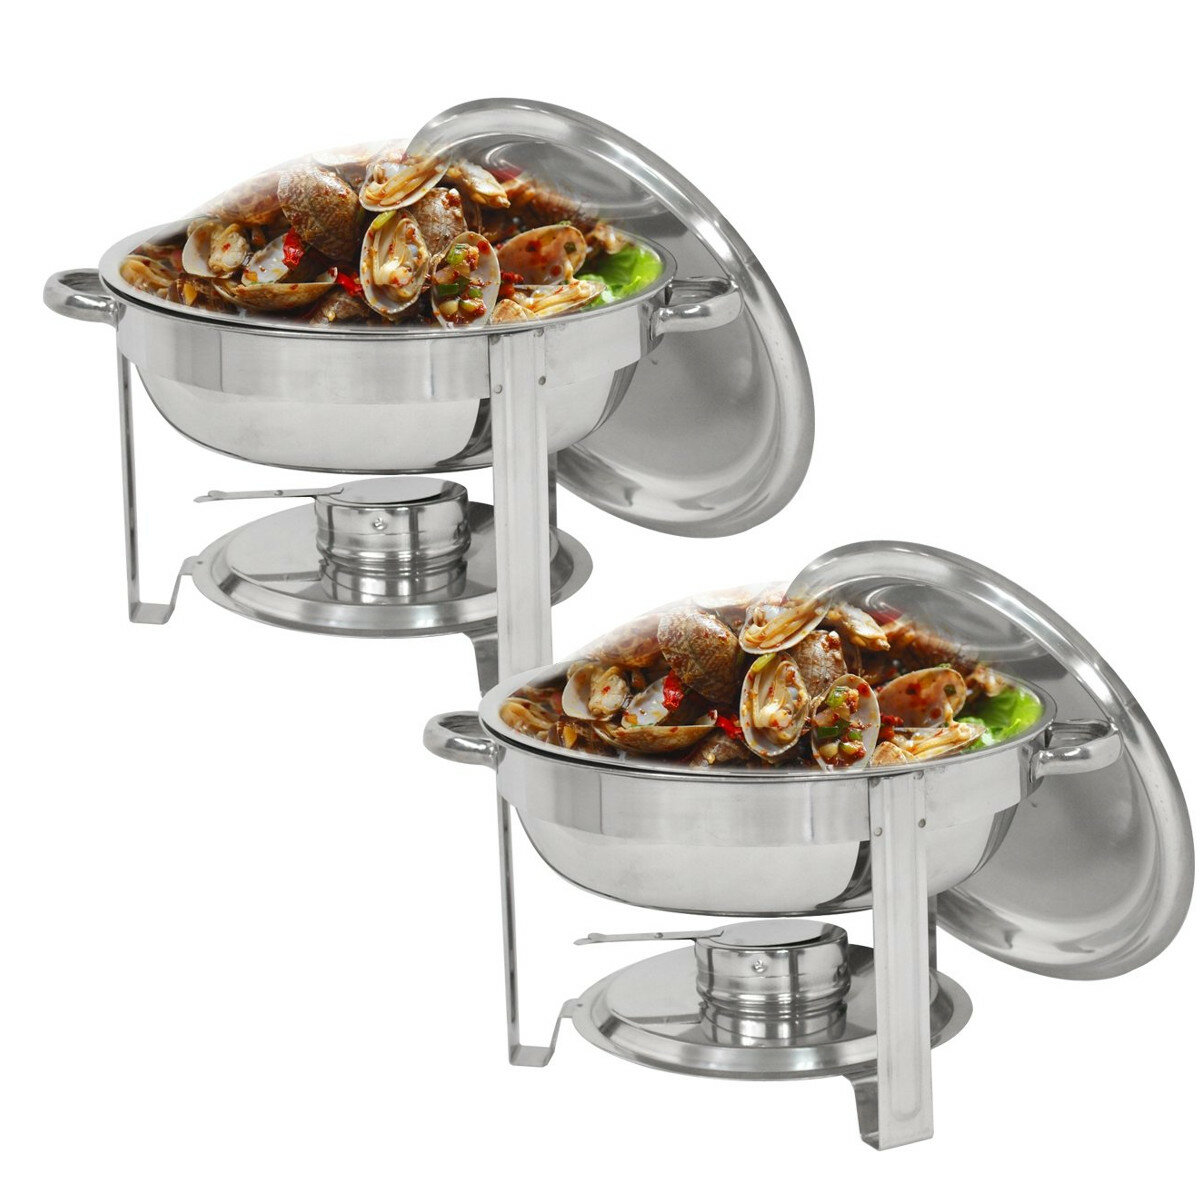 Tooca 2pcs Set Stainless Steel Dining Stove 2 Pack 4 Litre Cooker